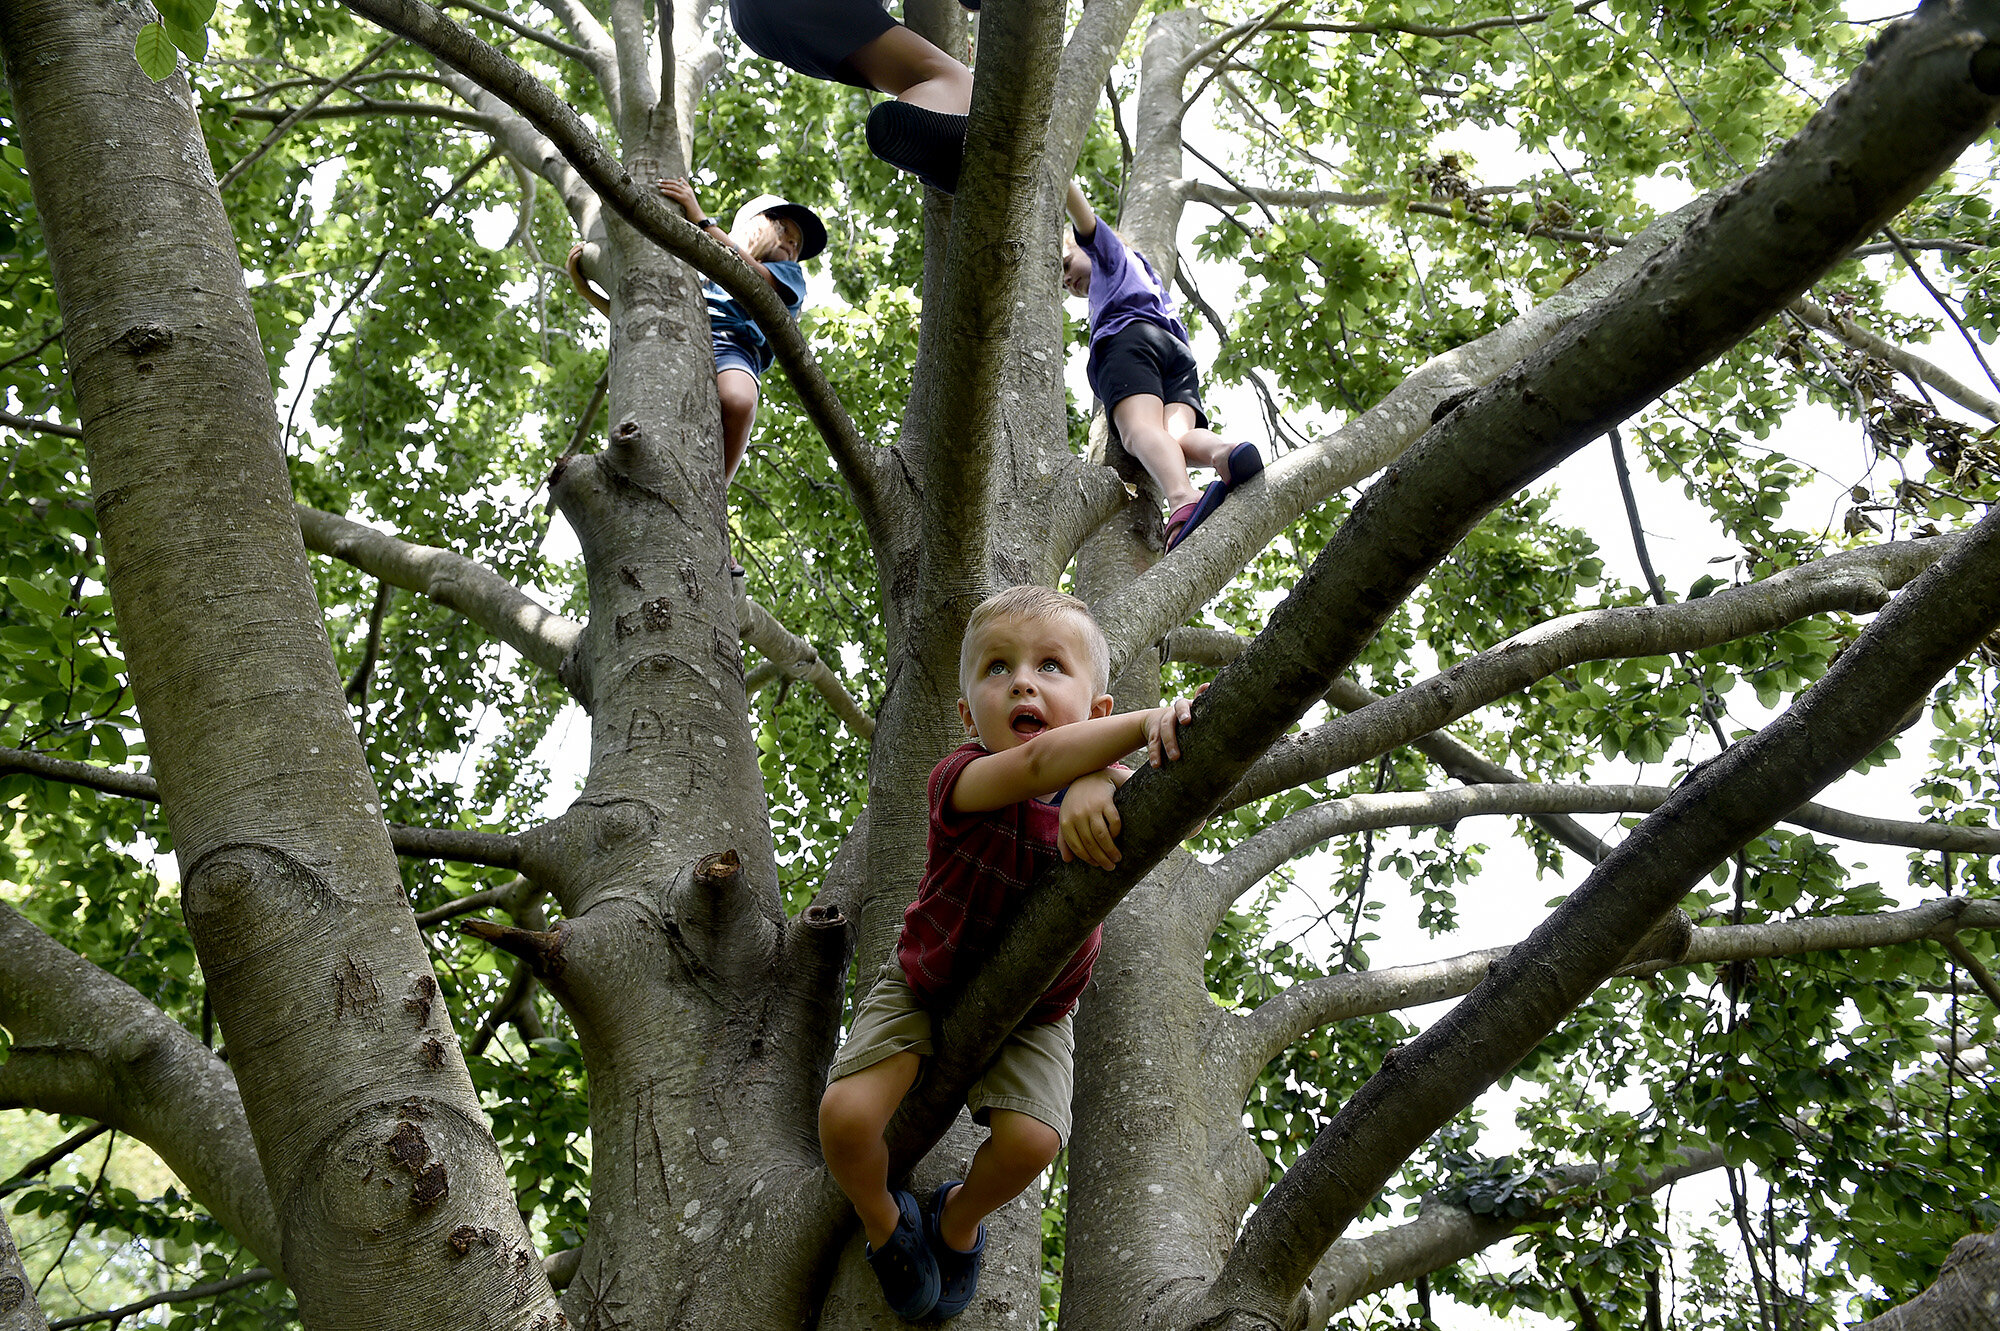  Bowen Parson, three, of Pawcatuck, lays on a branch as he climbs a tree with friends after a summer reading program at the Stonington Free Library on Thursday, August 1, 2019. (The Day)  